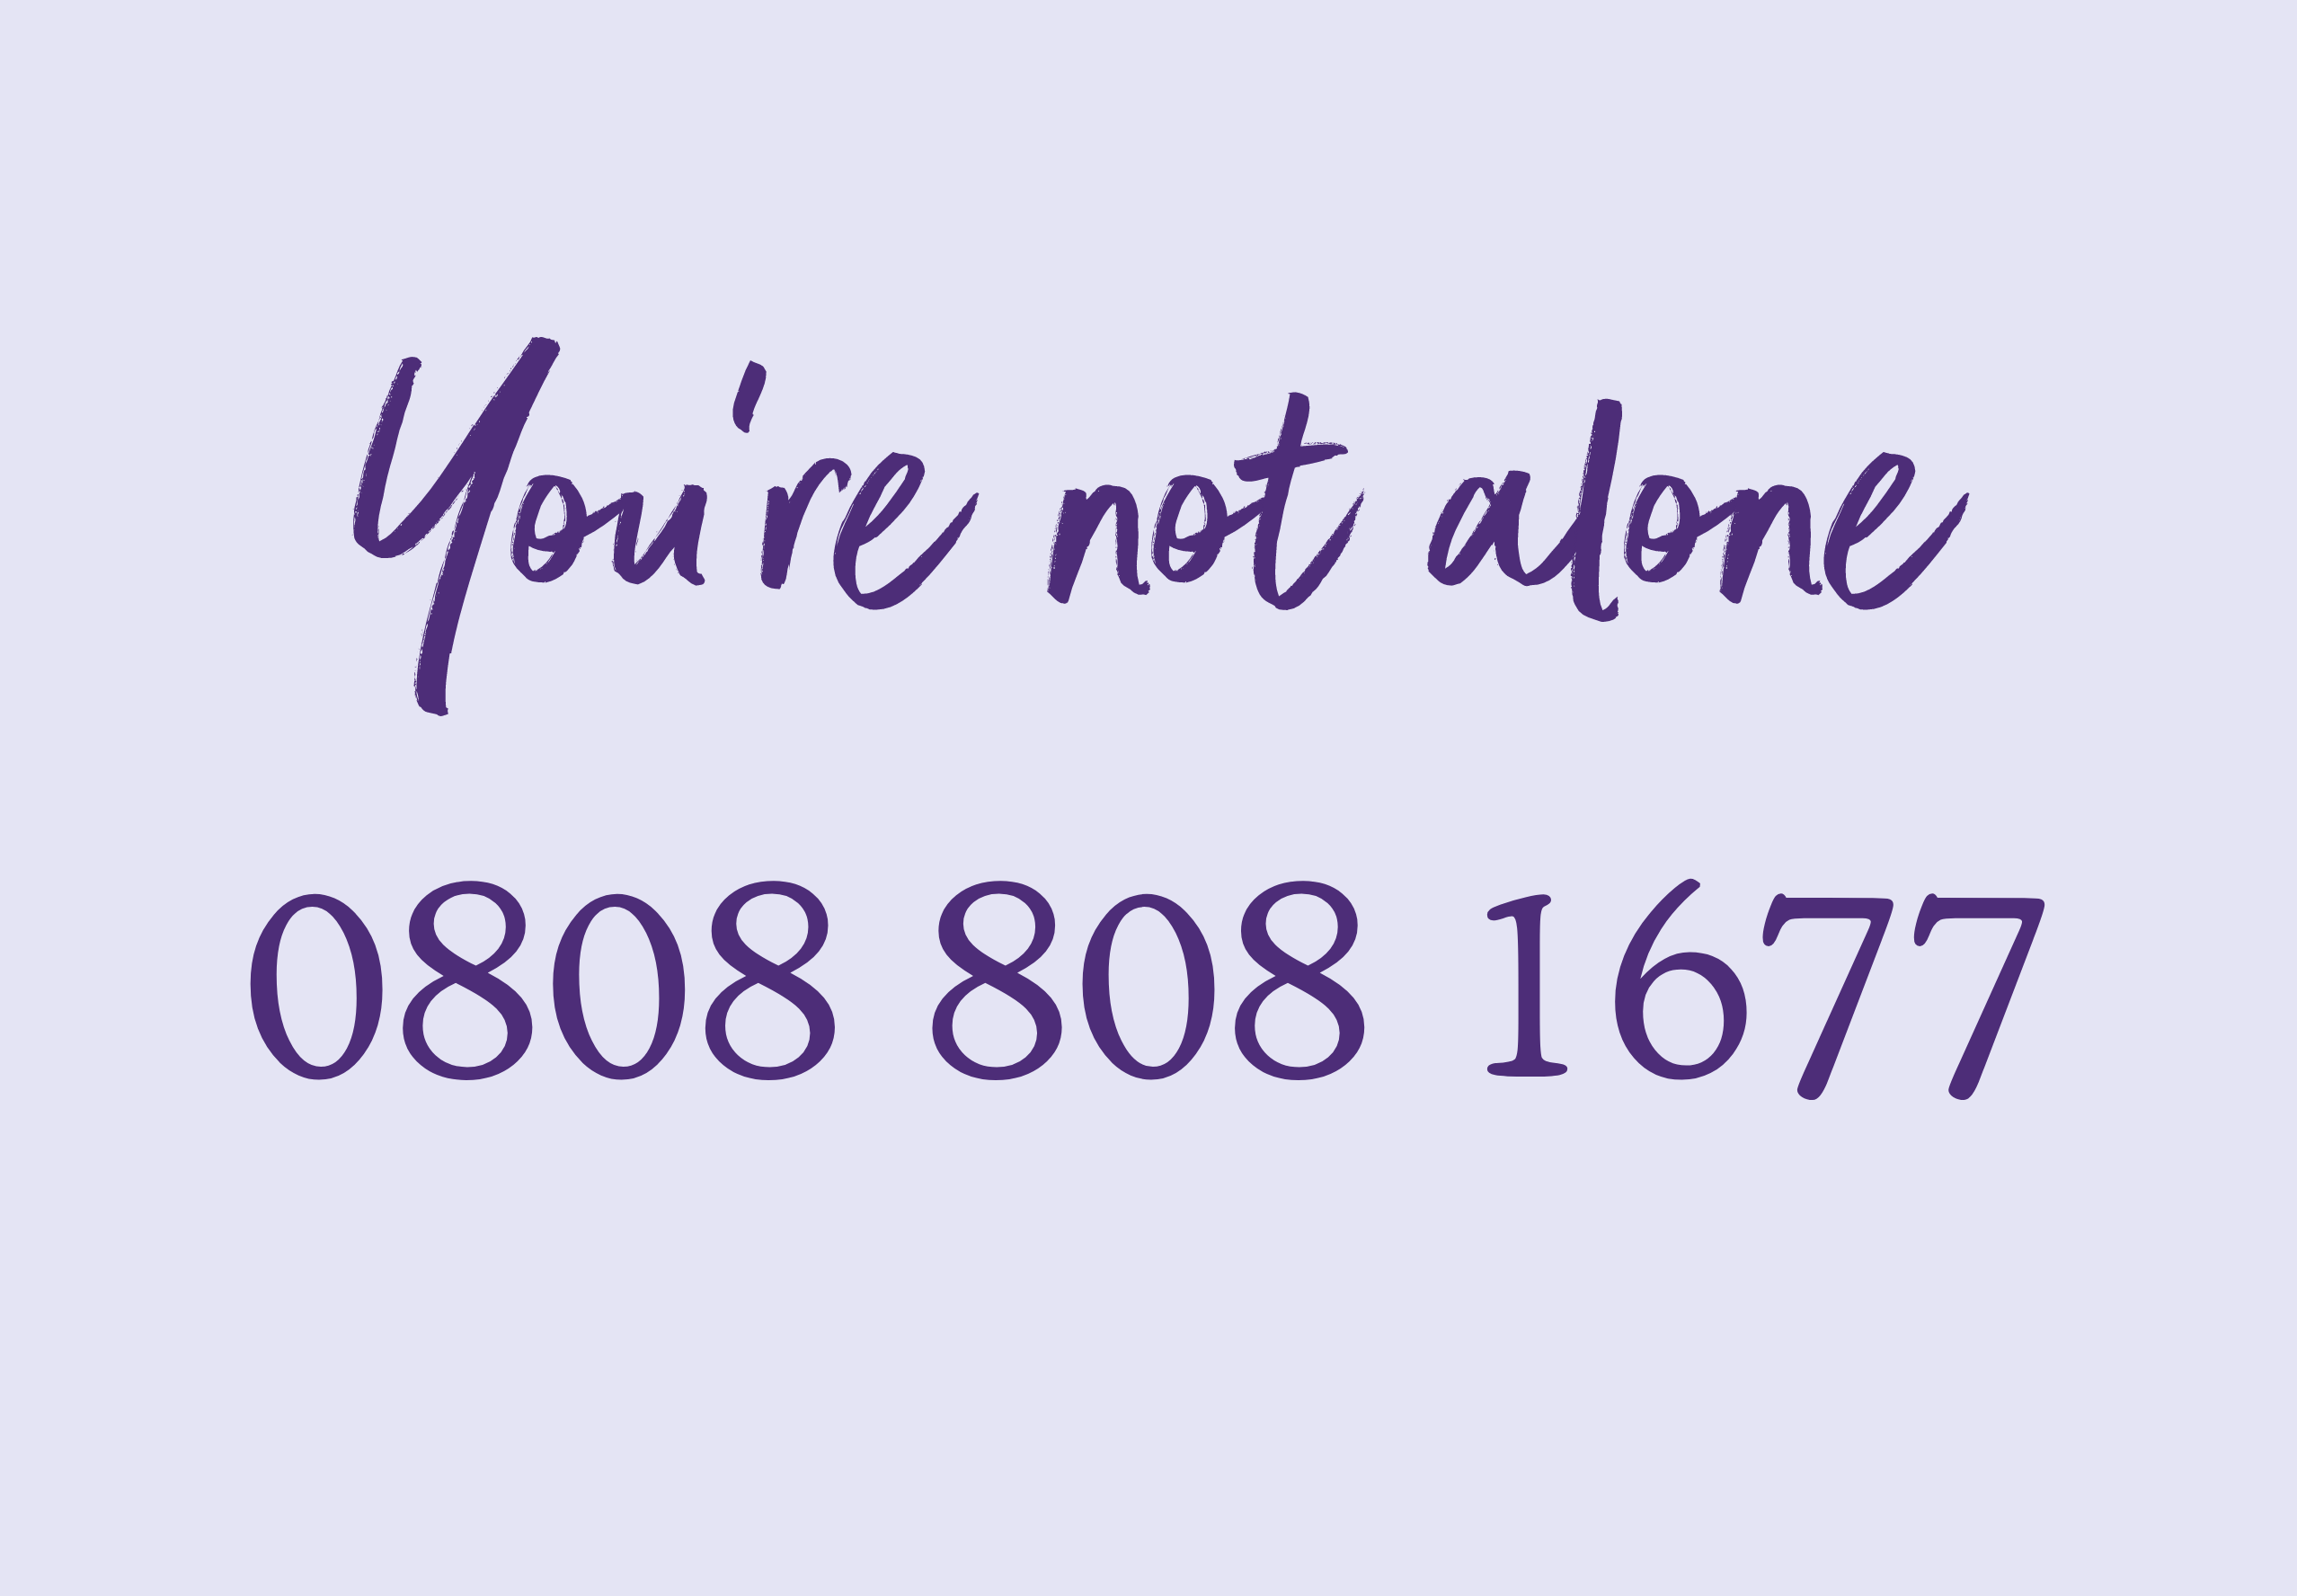 you're not alone 08088081677